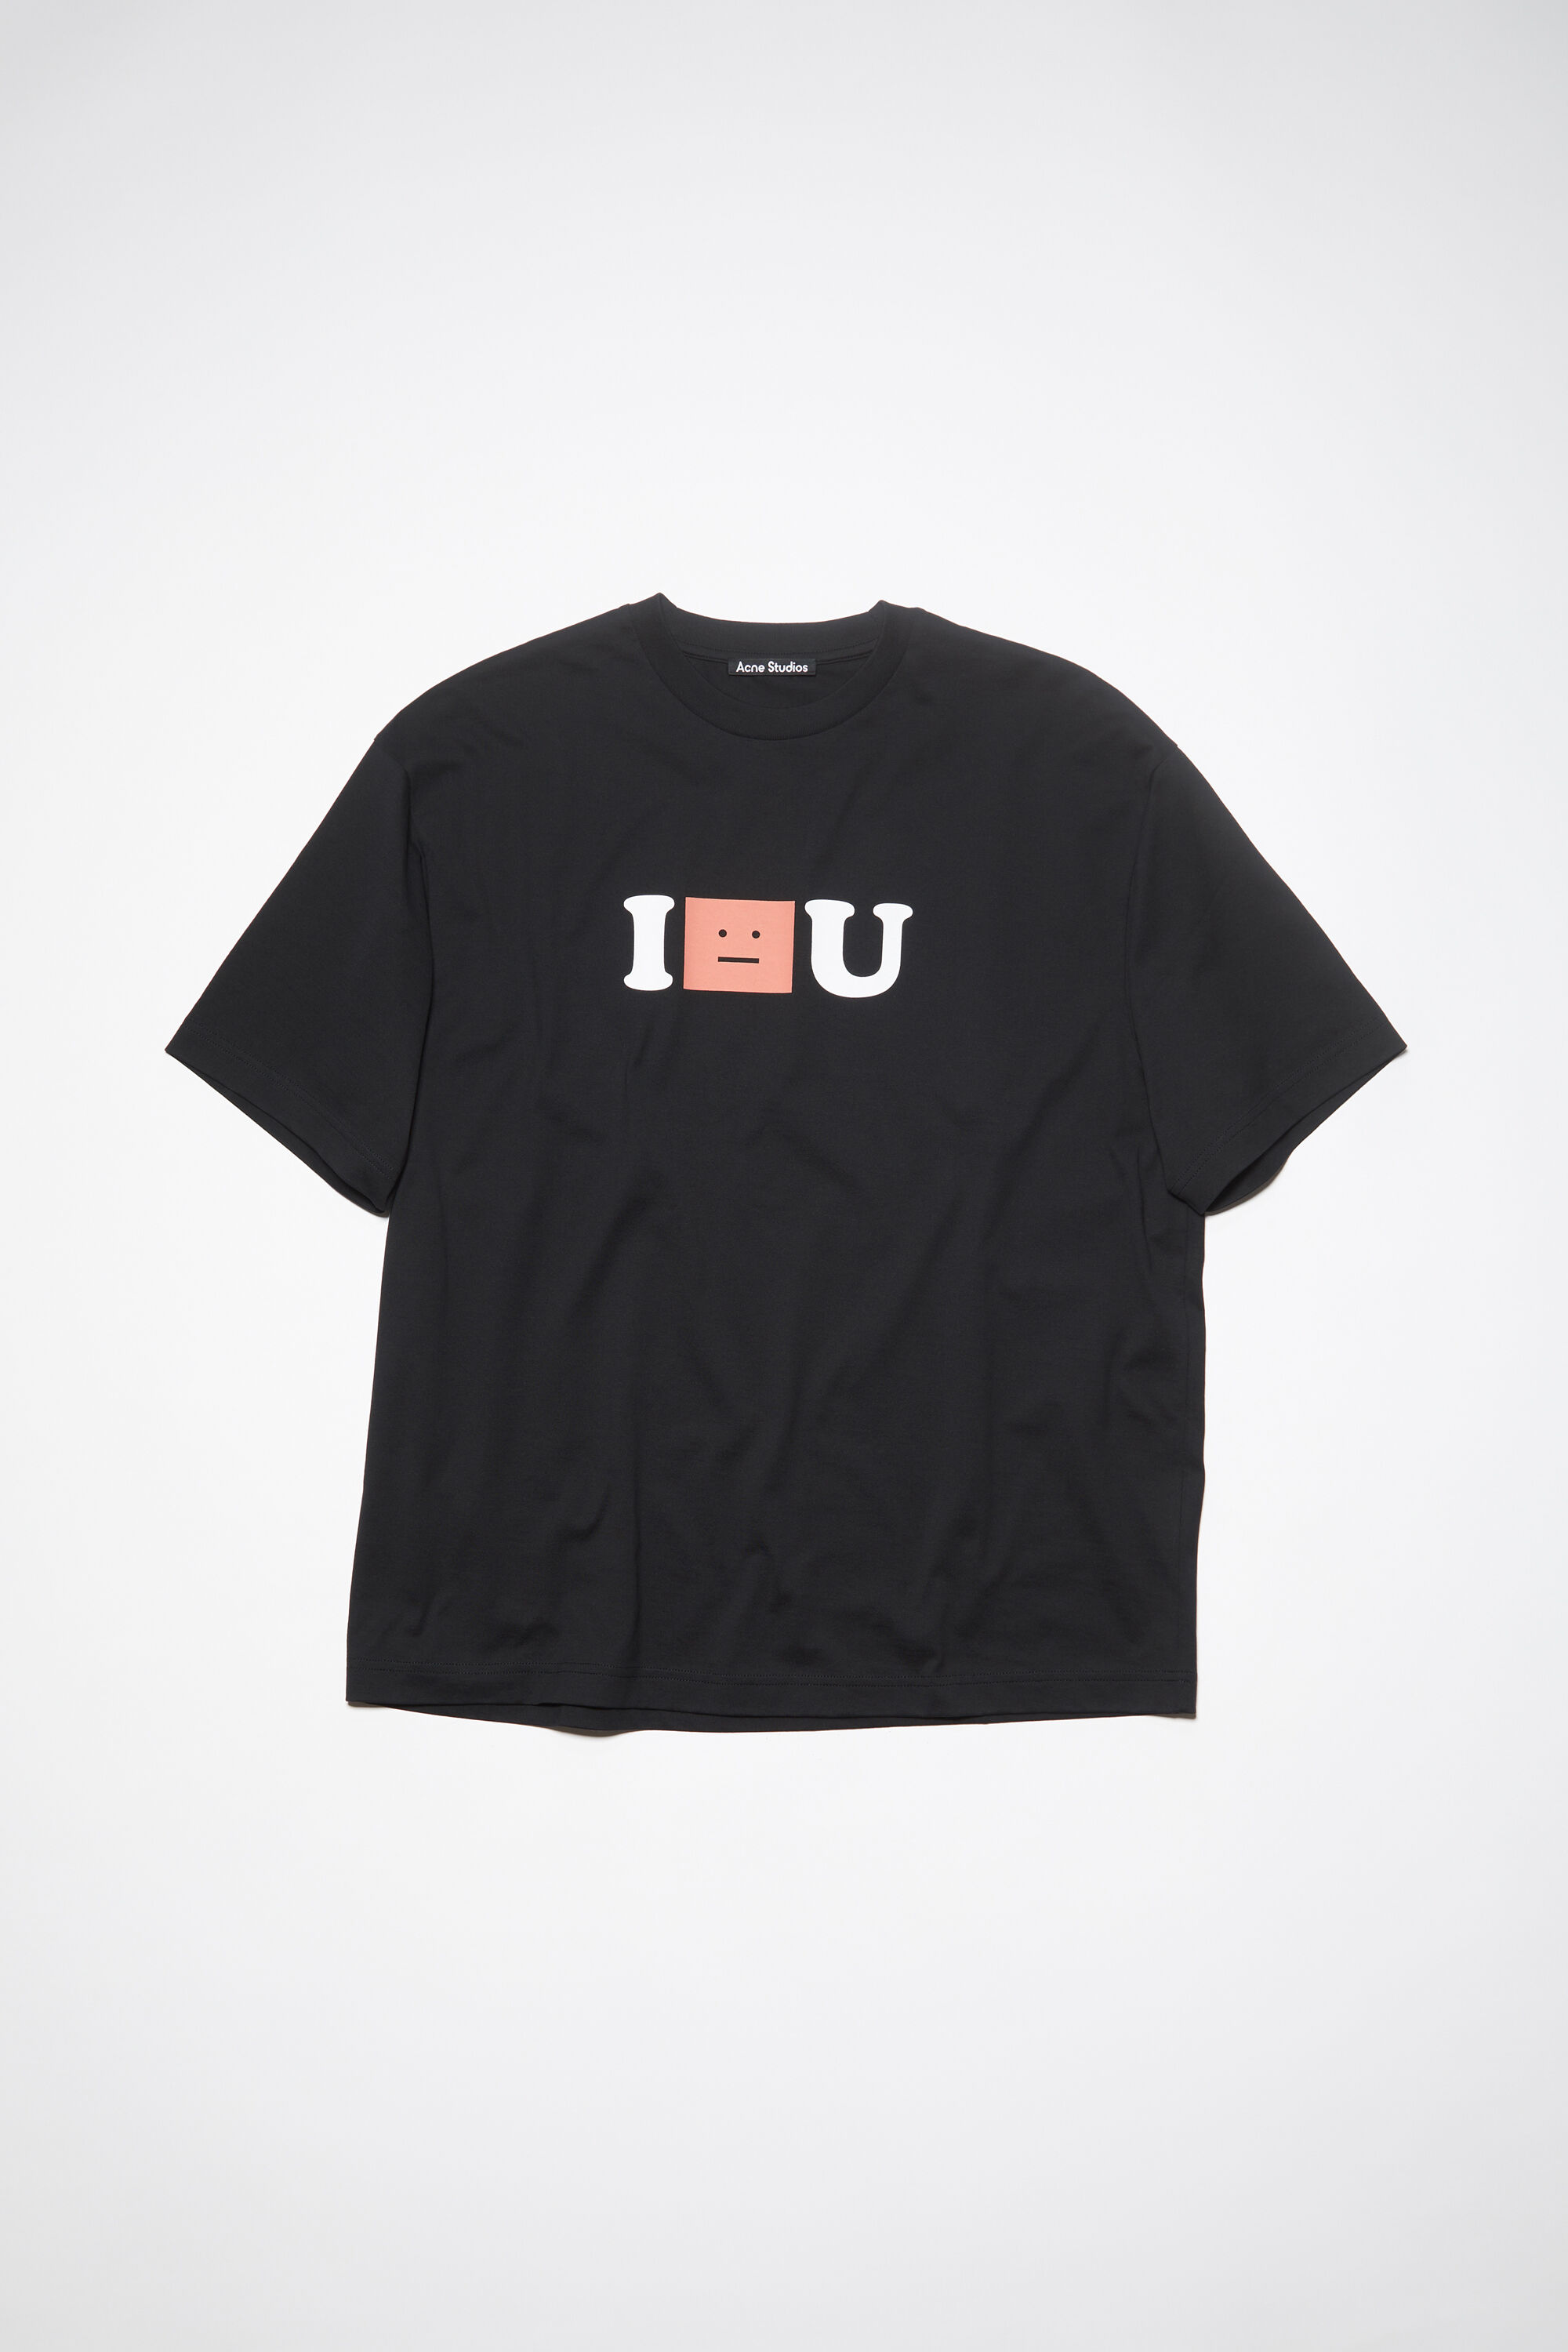 Acne Studios - Face logo t-shirt - Relaxed fit - Black